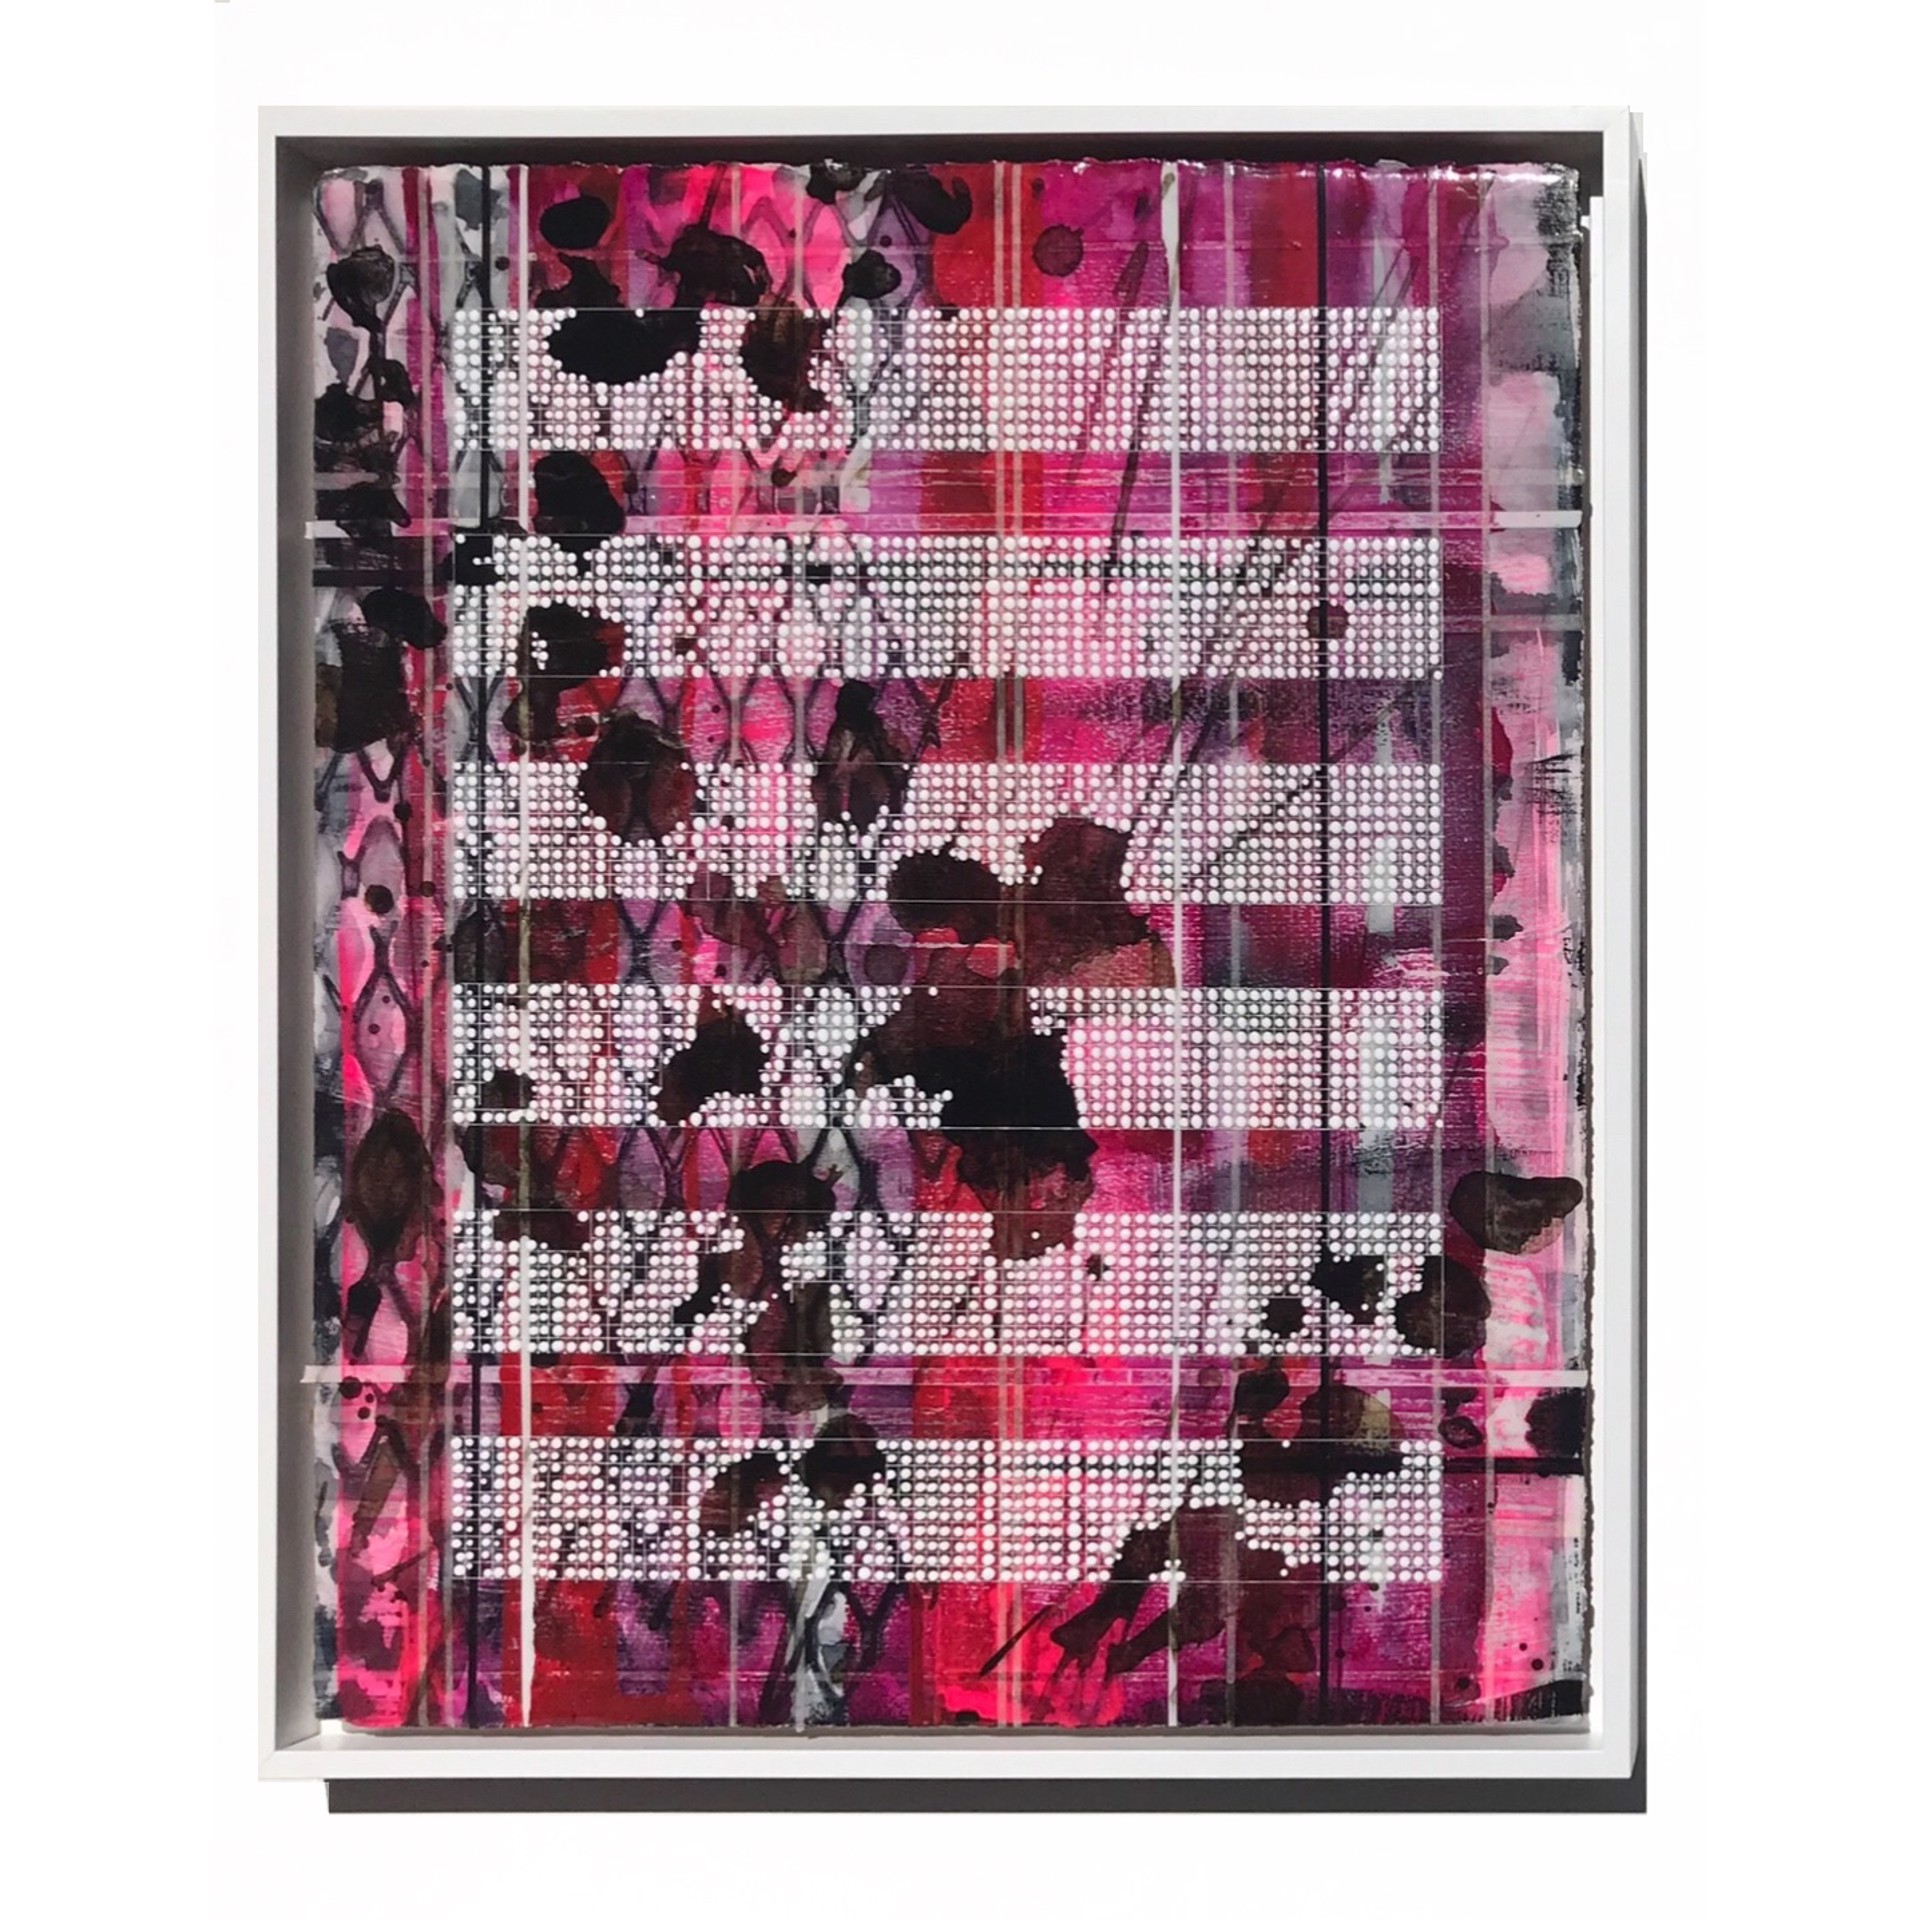 Abstract Layered Painting Made Up Of Layers Of Patterns In Black And Pink